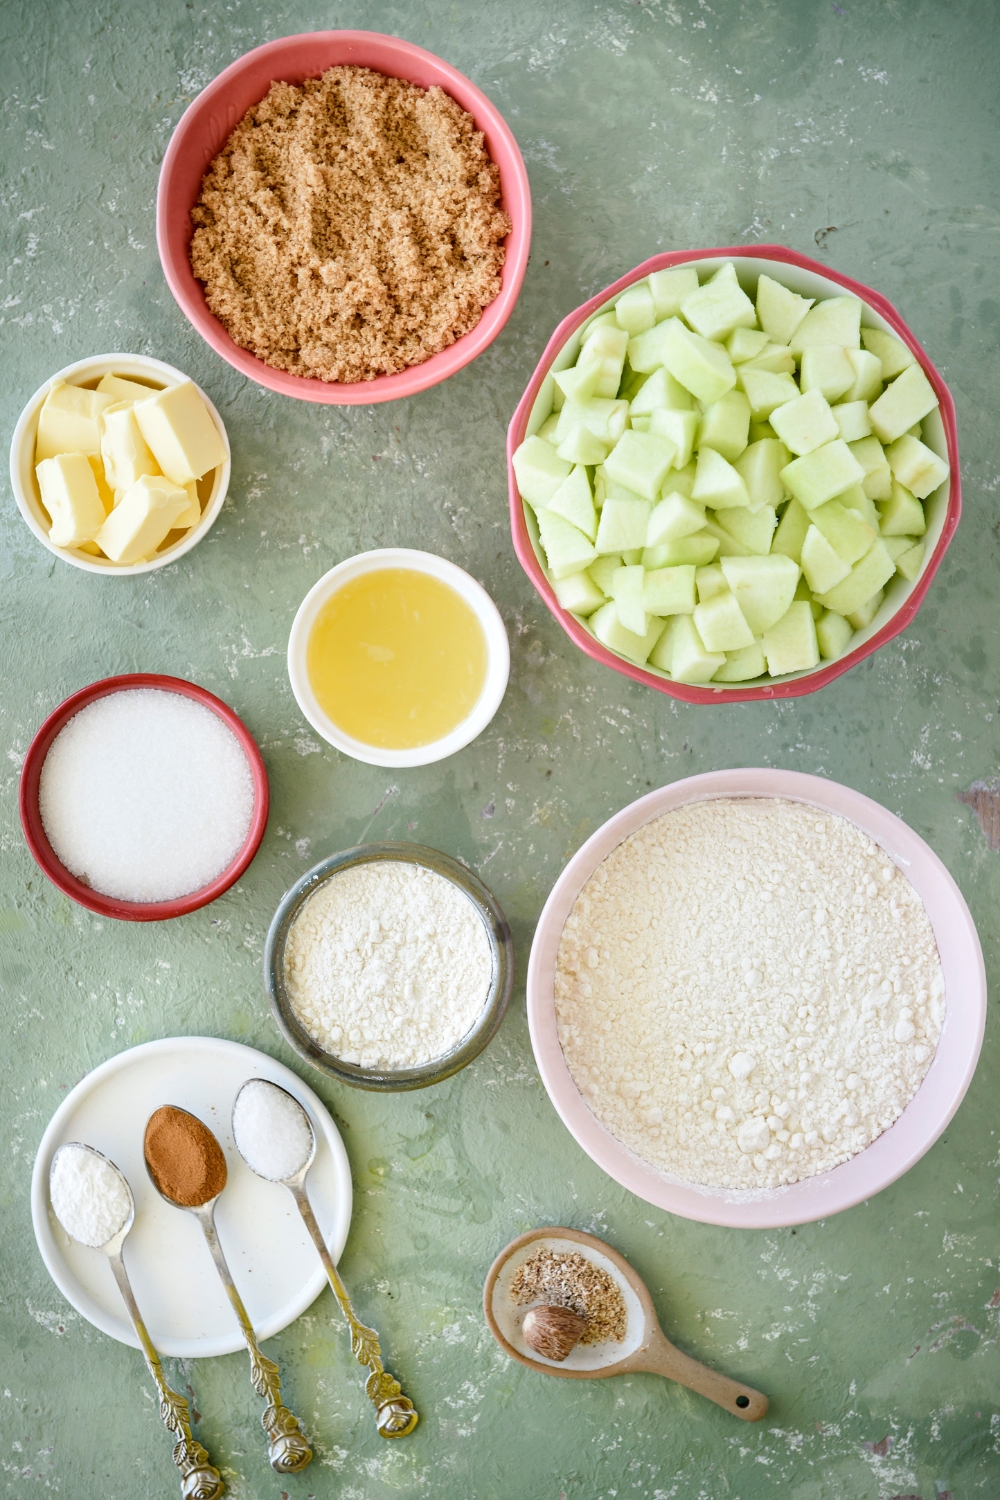 An assortment of ingredients including bowls of flour, diced apples, brown sugar, butter, lemon juice, and spoonfuls of spices resting on a plate. Everything is on a blue countertop.